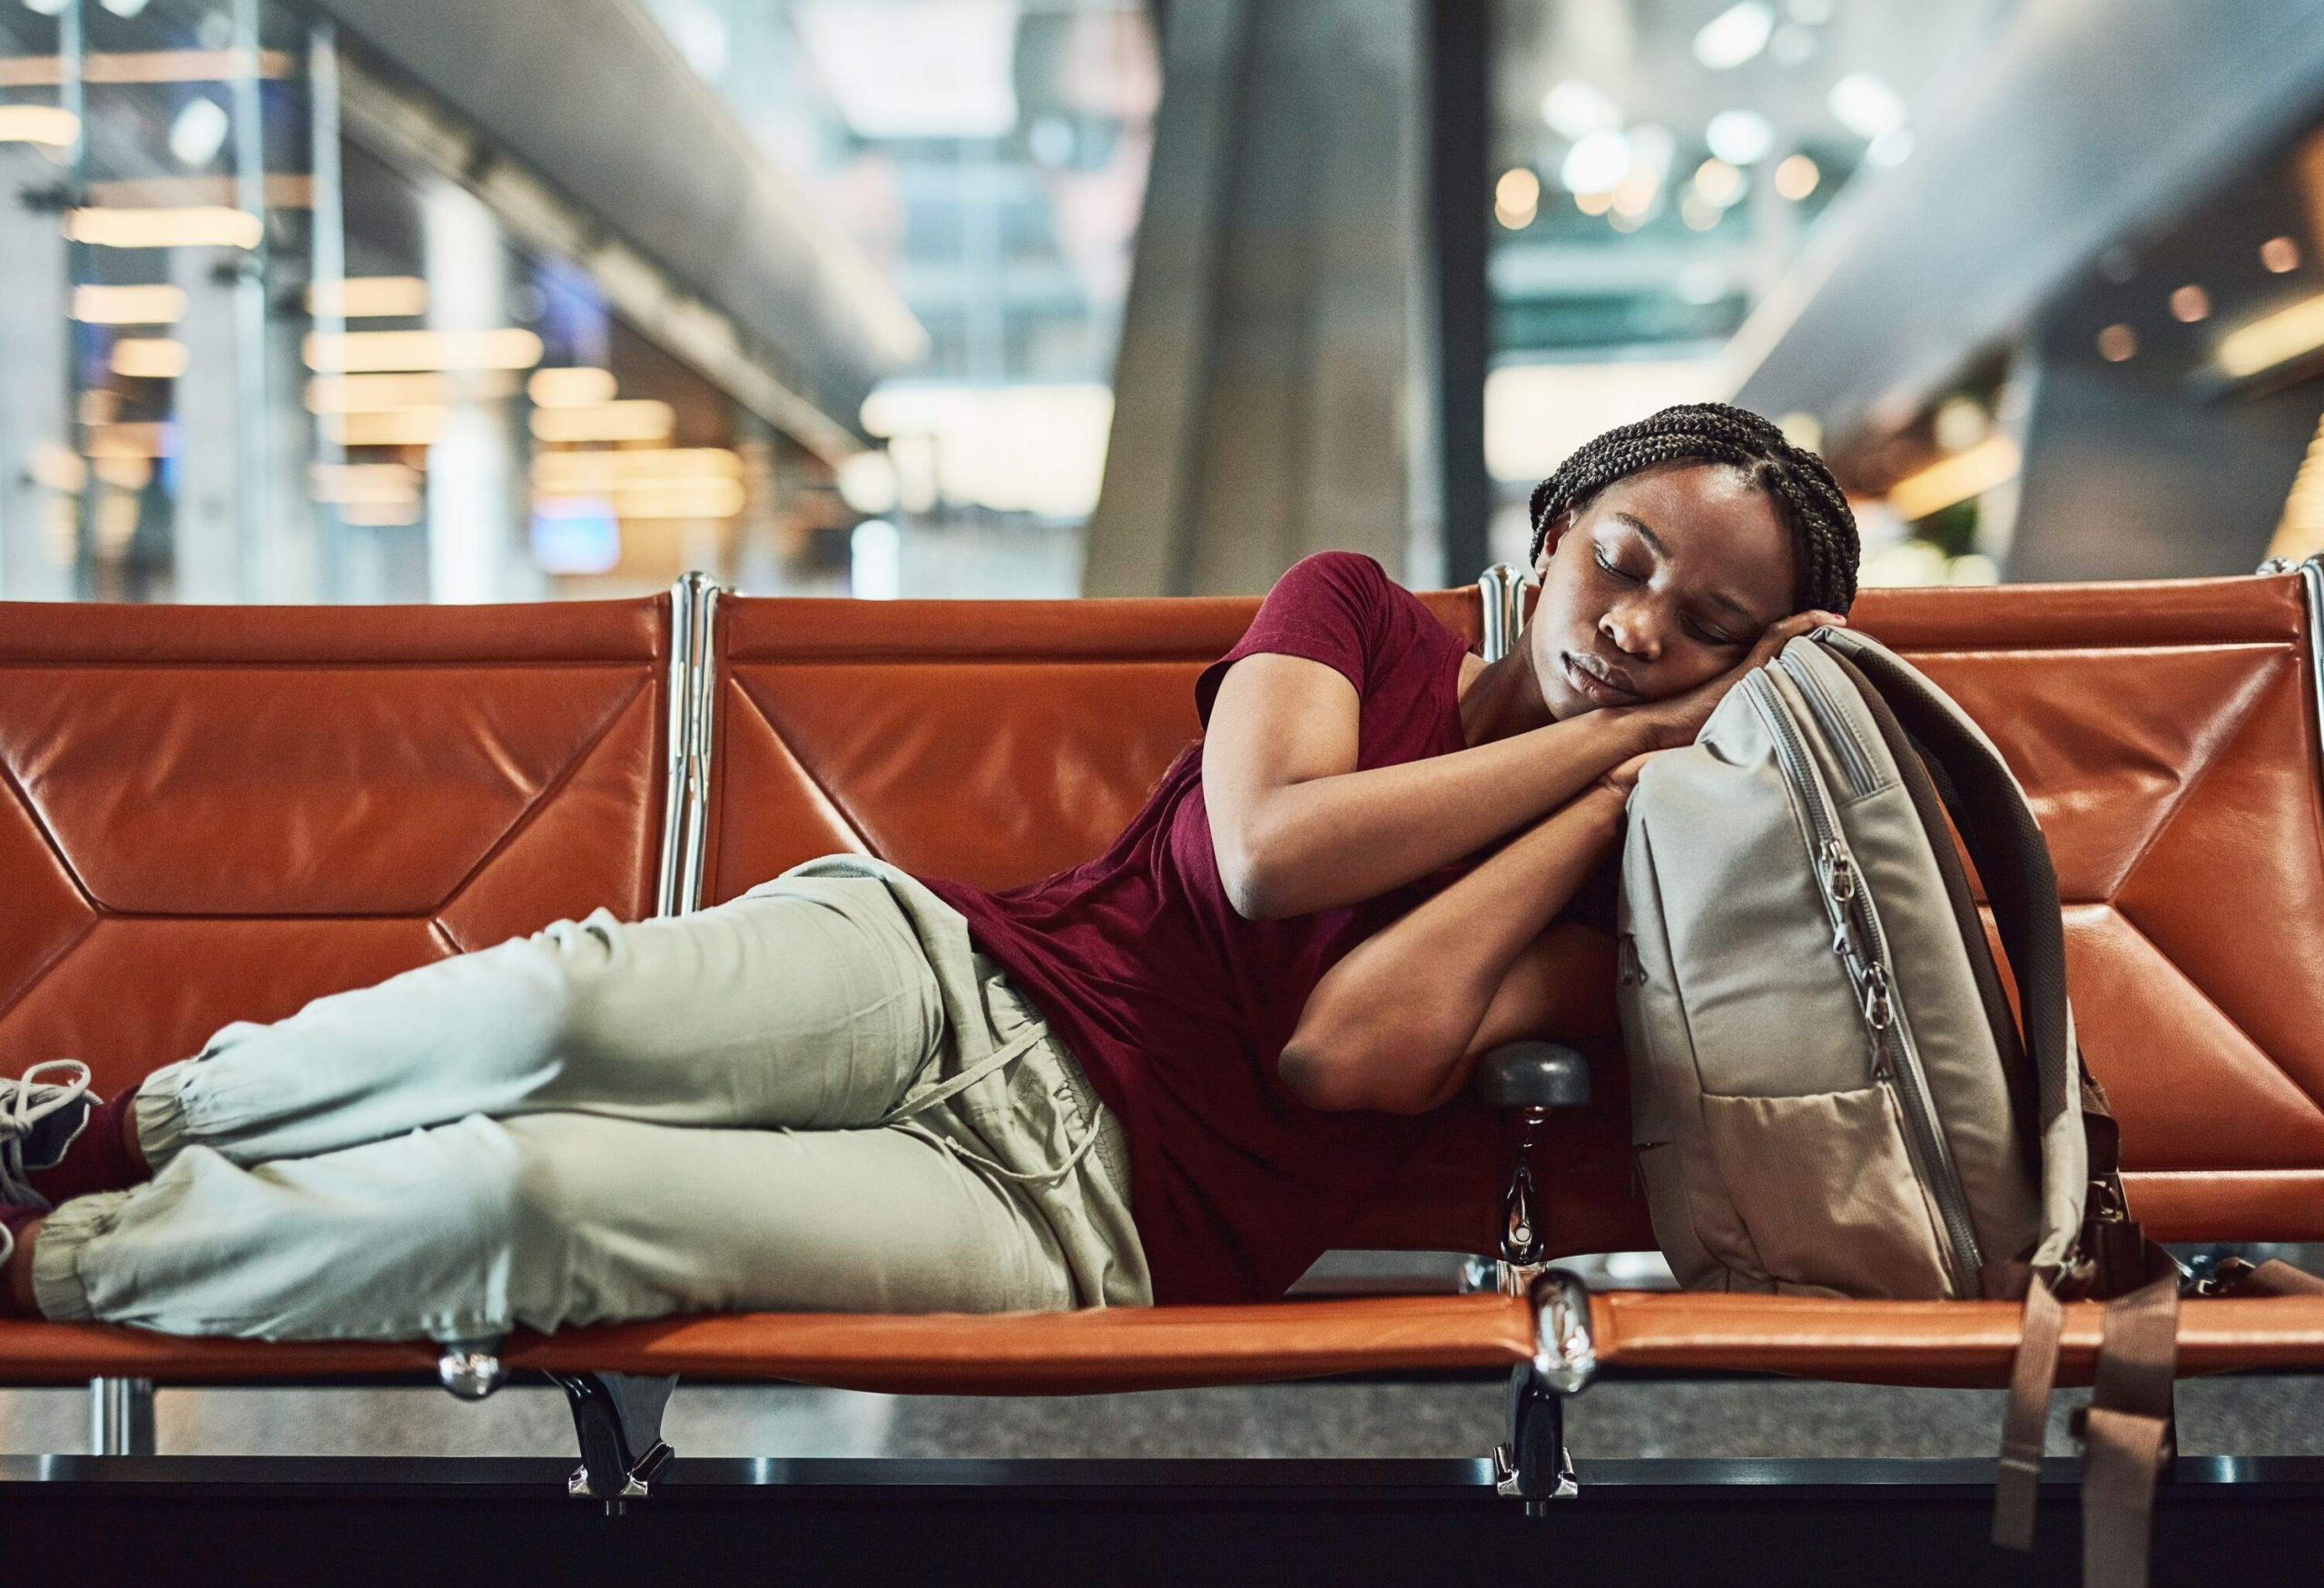 Shot of a young woman falling asleep at the airport while waiting for departure